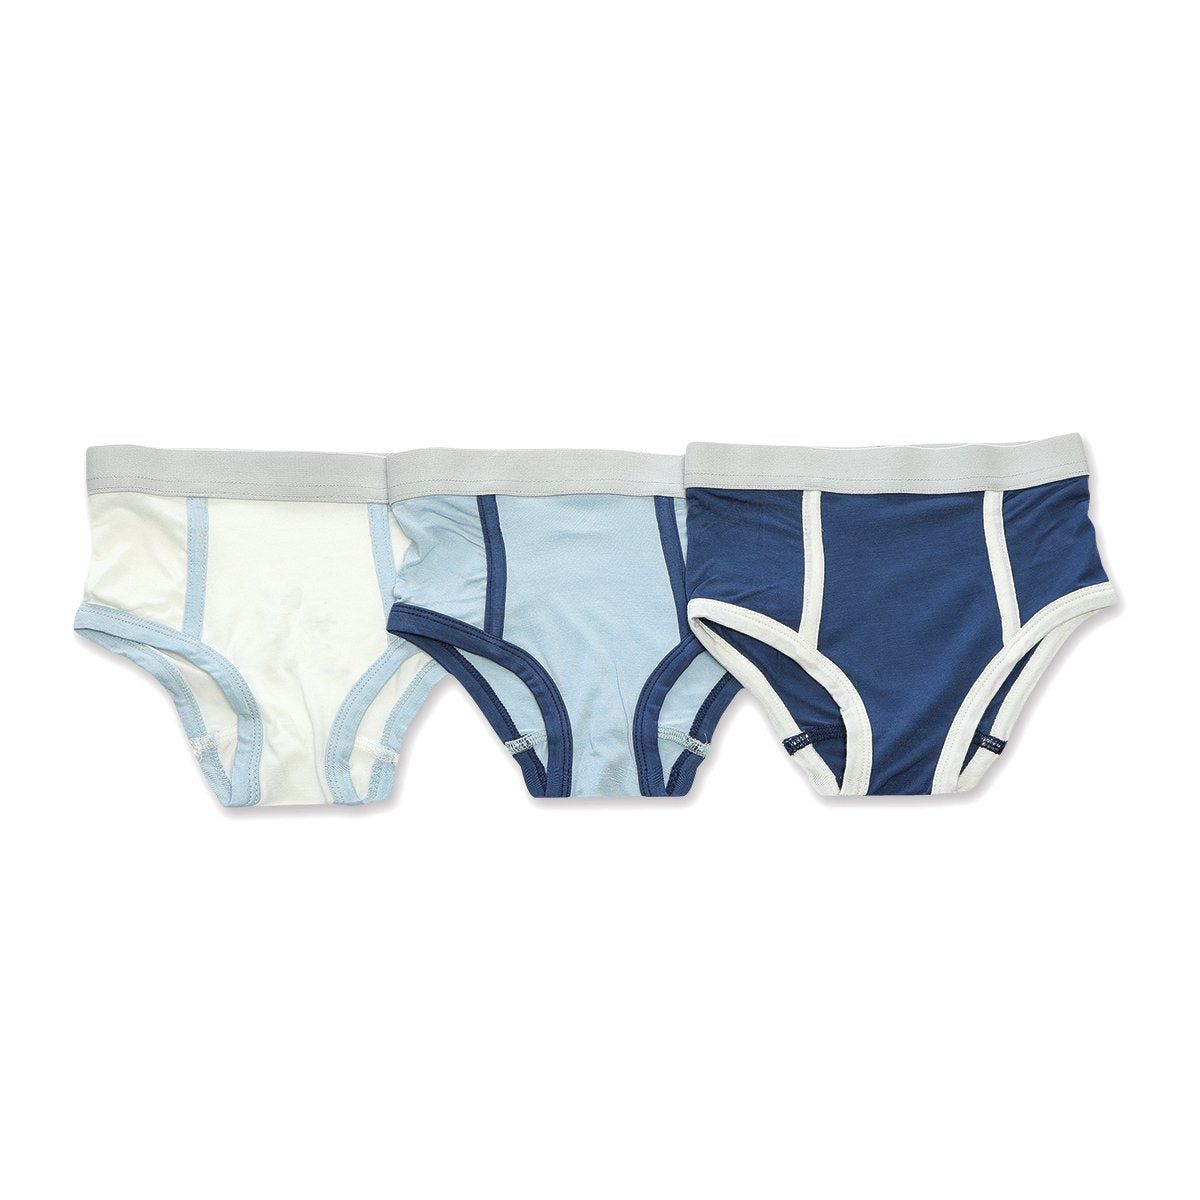 Bamboo Boys Briefs 3 pack (Baby Blue/Captain Navy/Feather